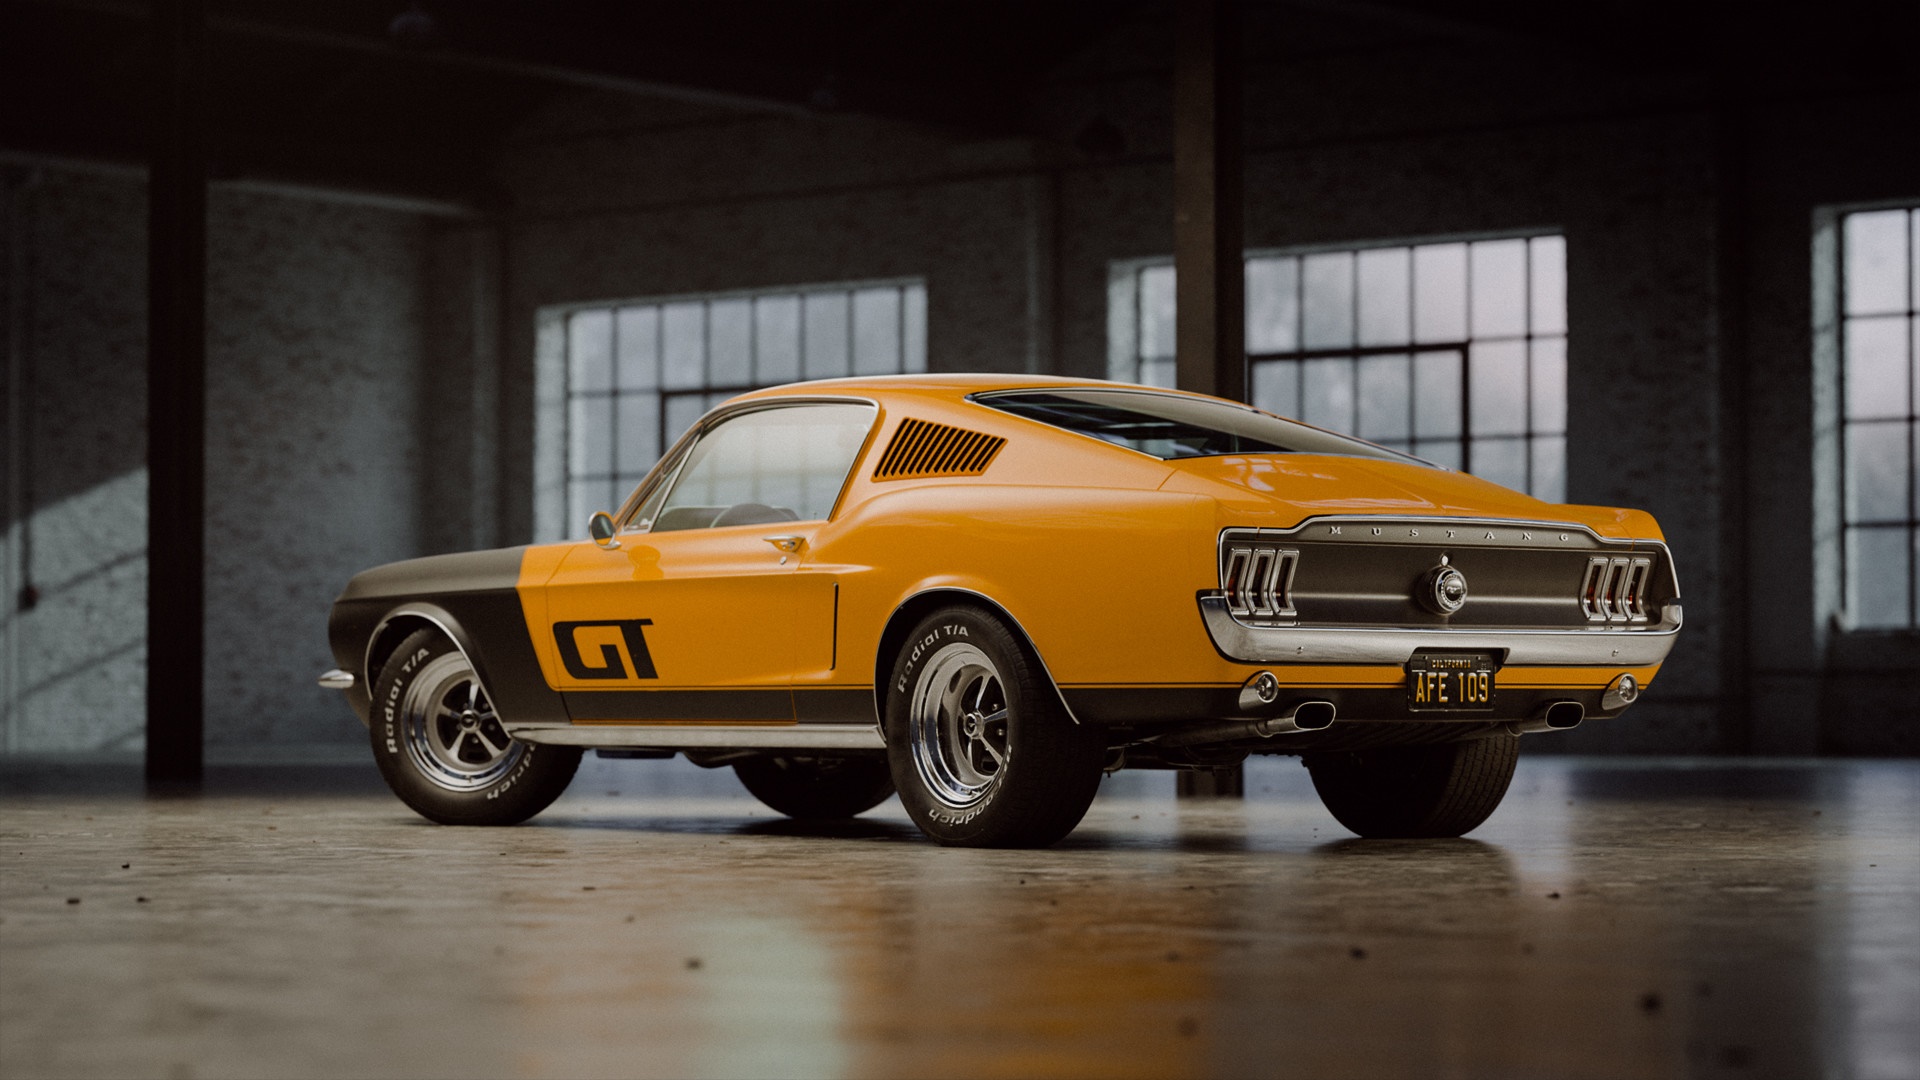 1968 Ford Mustang Gt Fastback Wallpaper Backiee